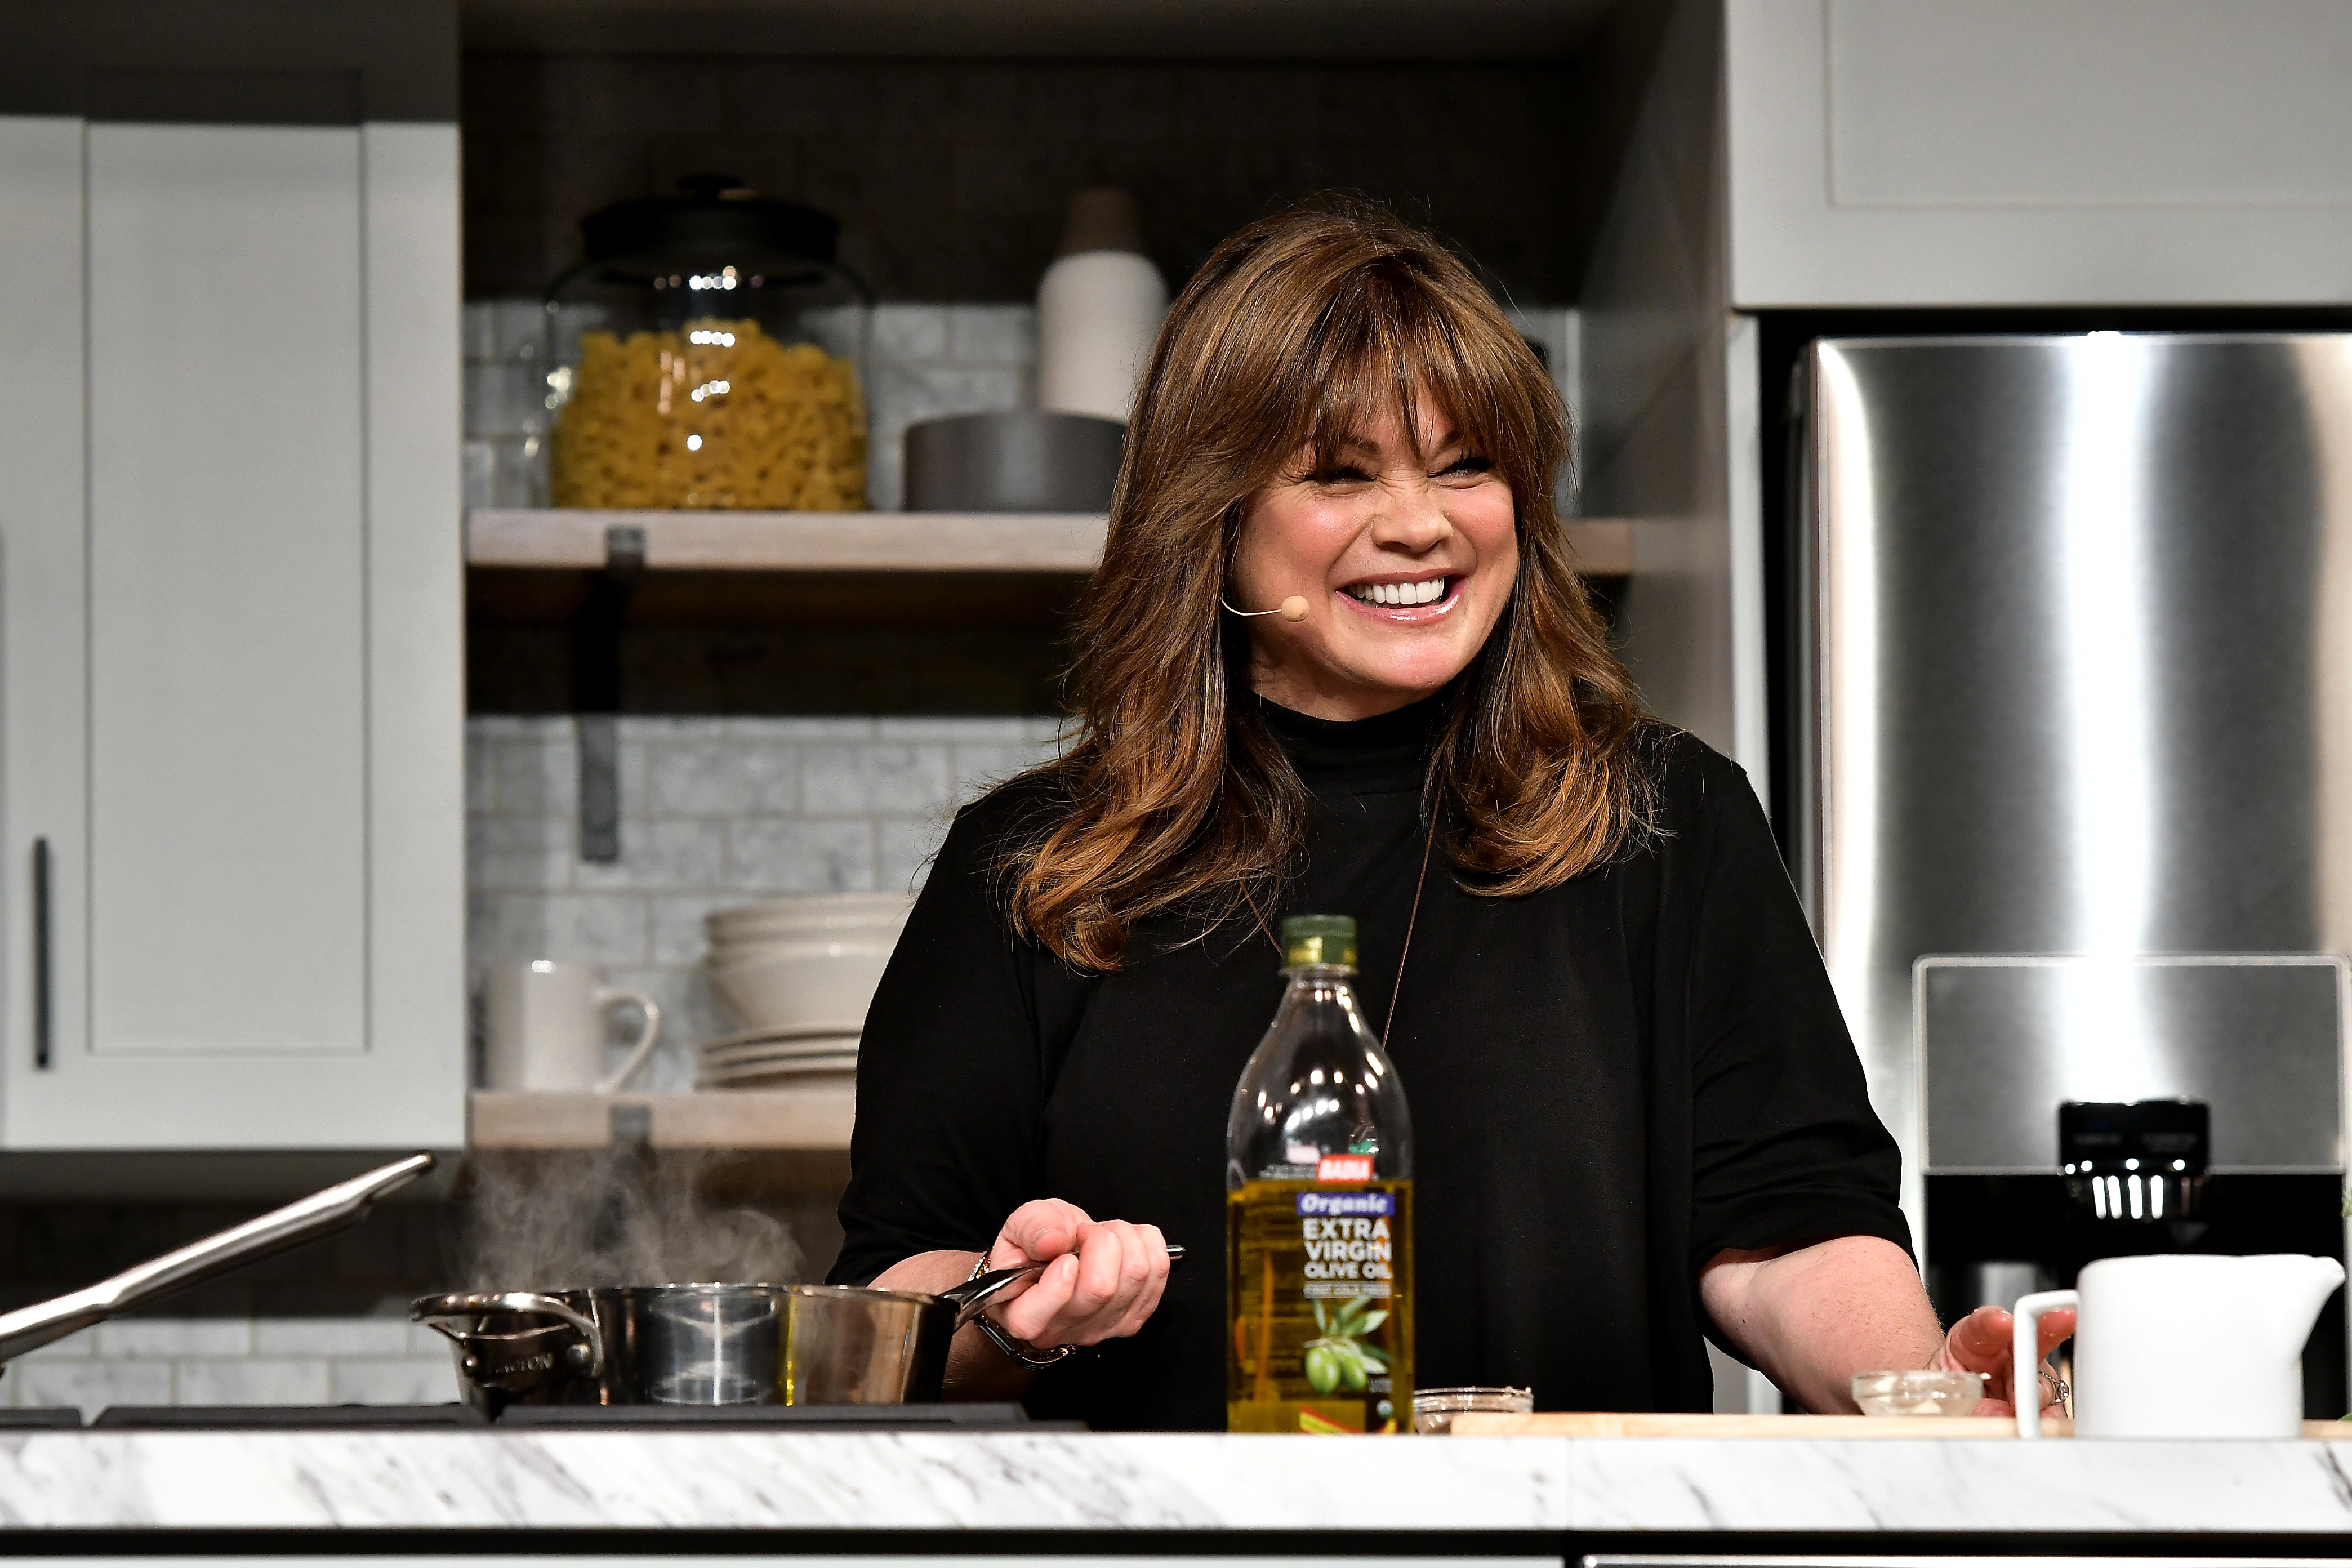 Food Network star Valerie Bertinelli wears a black turtleneck while preparing a meal at a Food Network event.